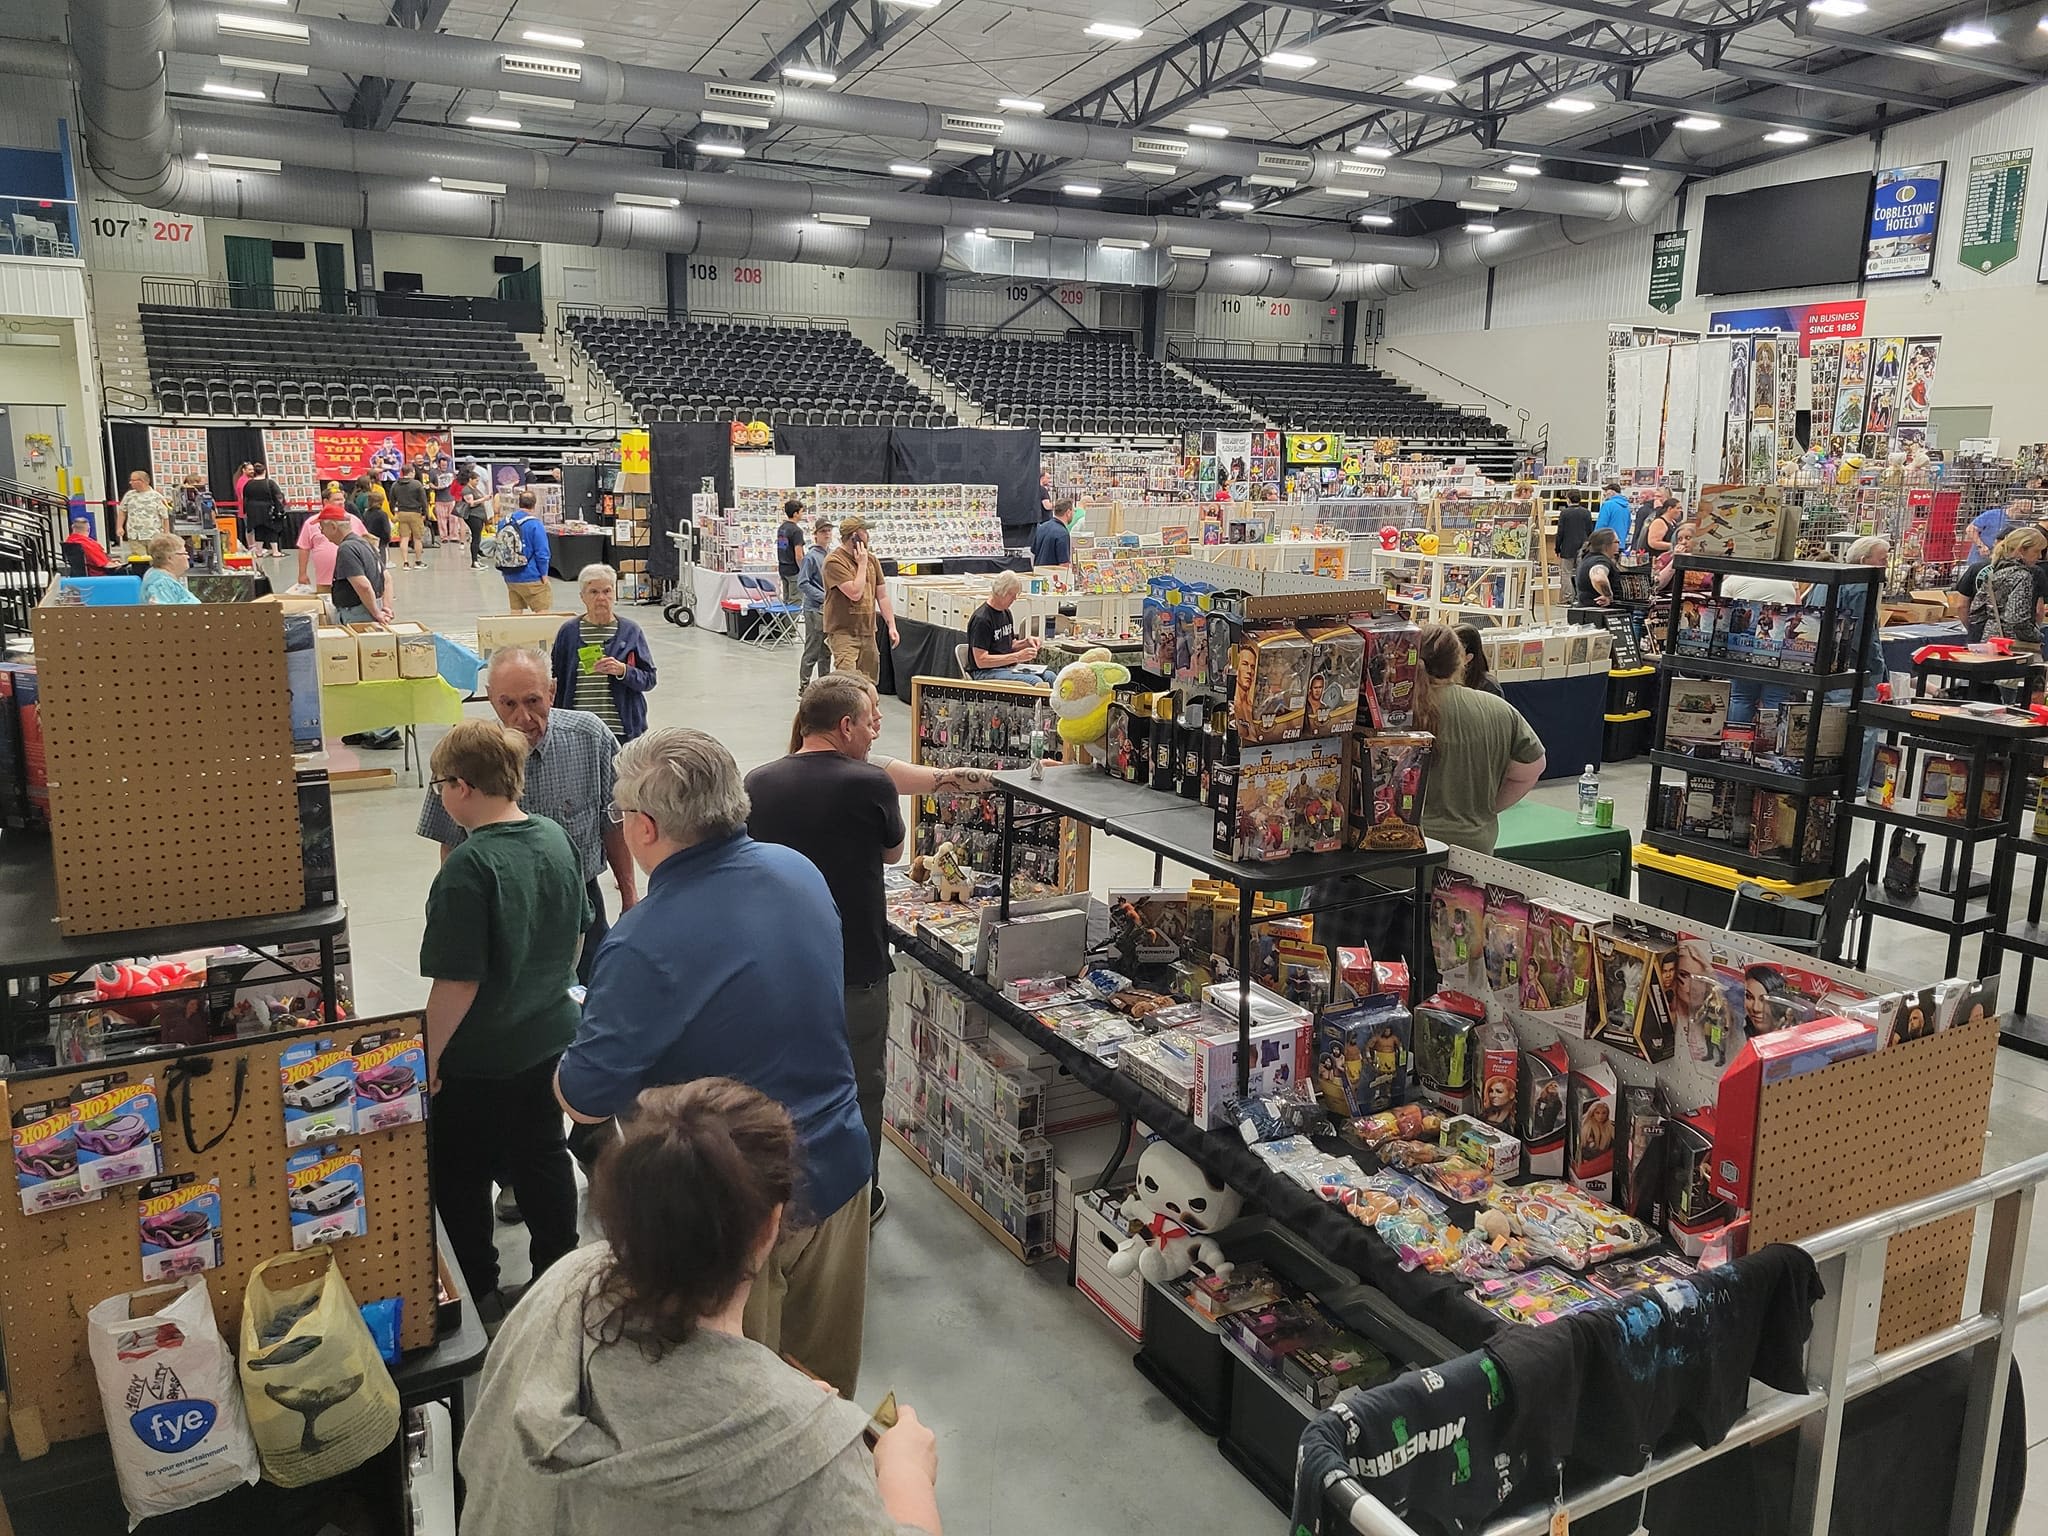 A vintage comic and toy show is coming to Cudahy on July 28 with 48 tables of vendors